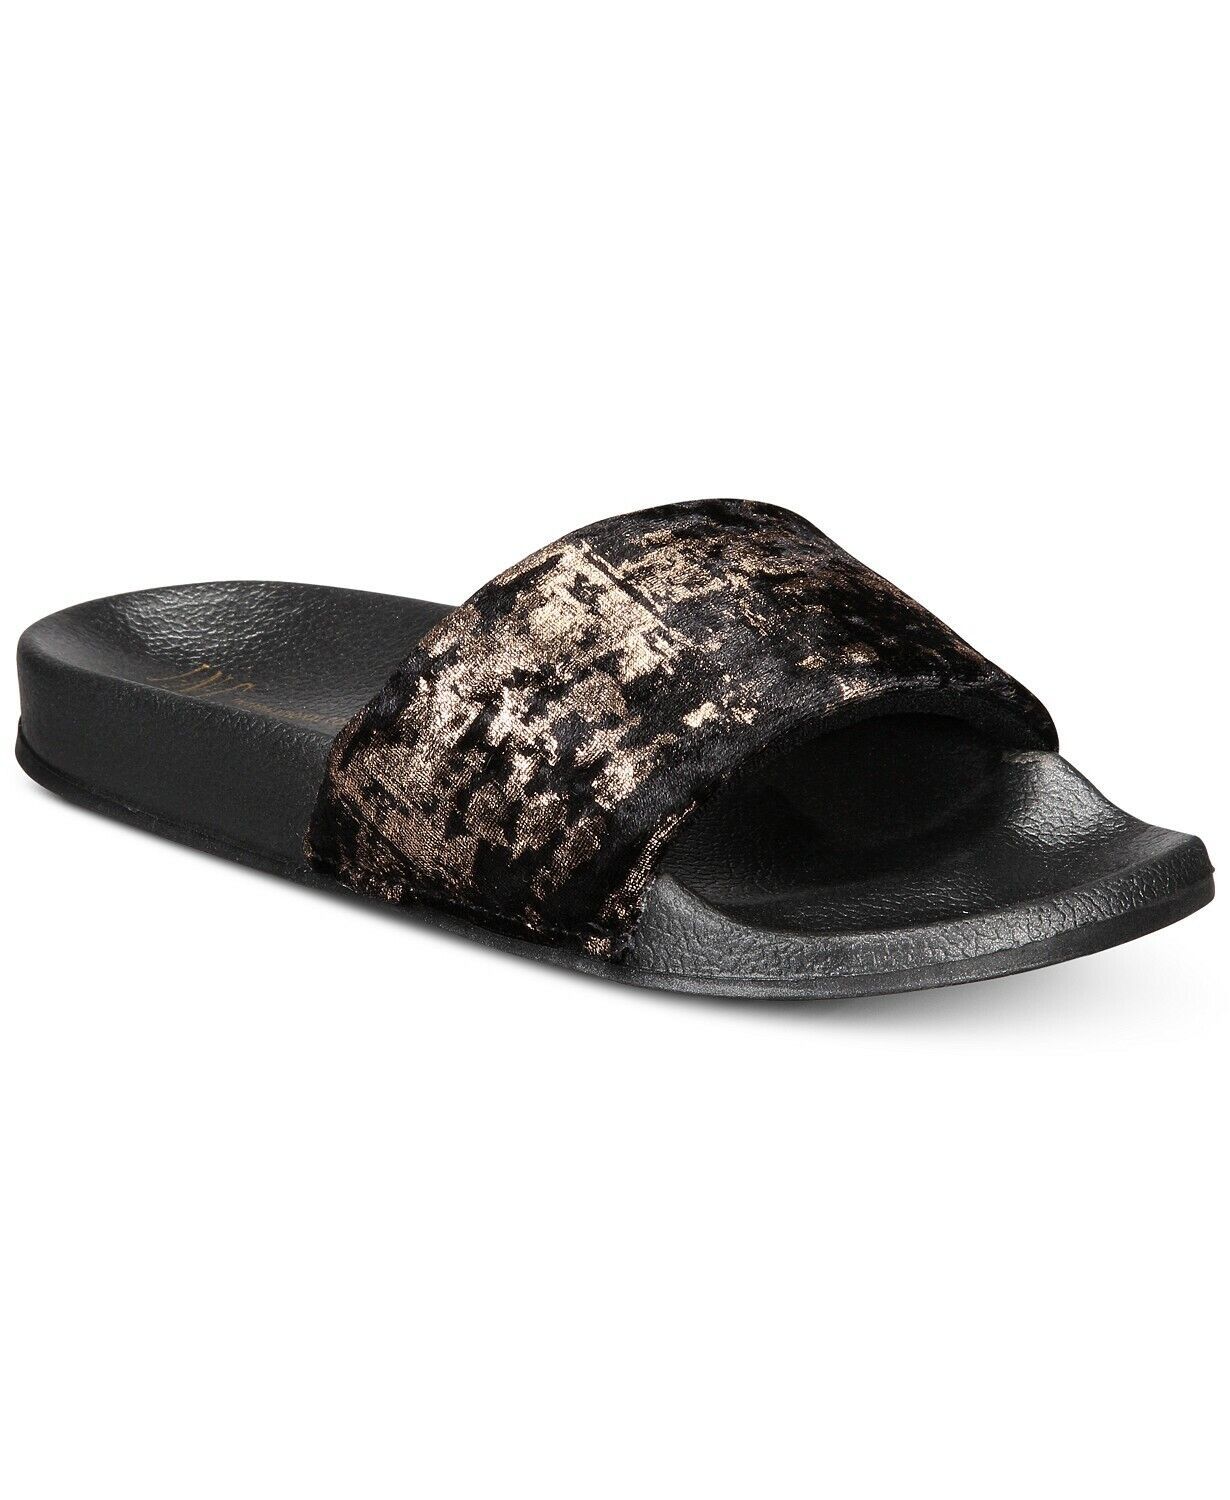 Primary image for INC International Concepts INC Metallic Velour Slide Slippers Black-Small